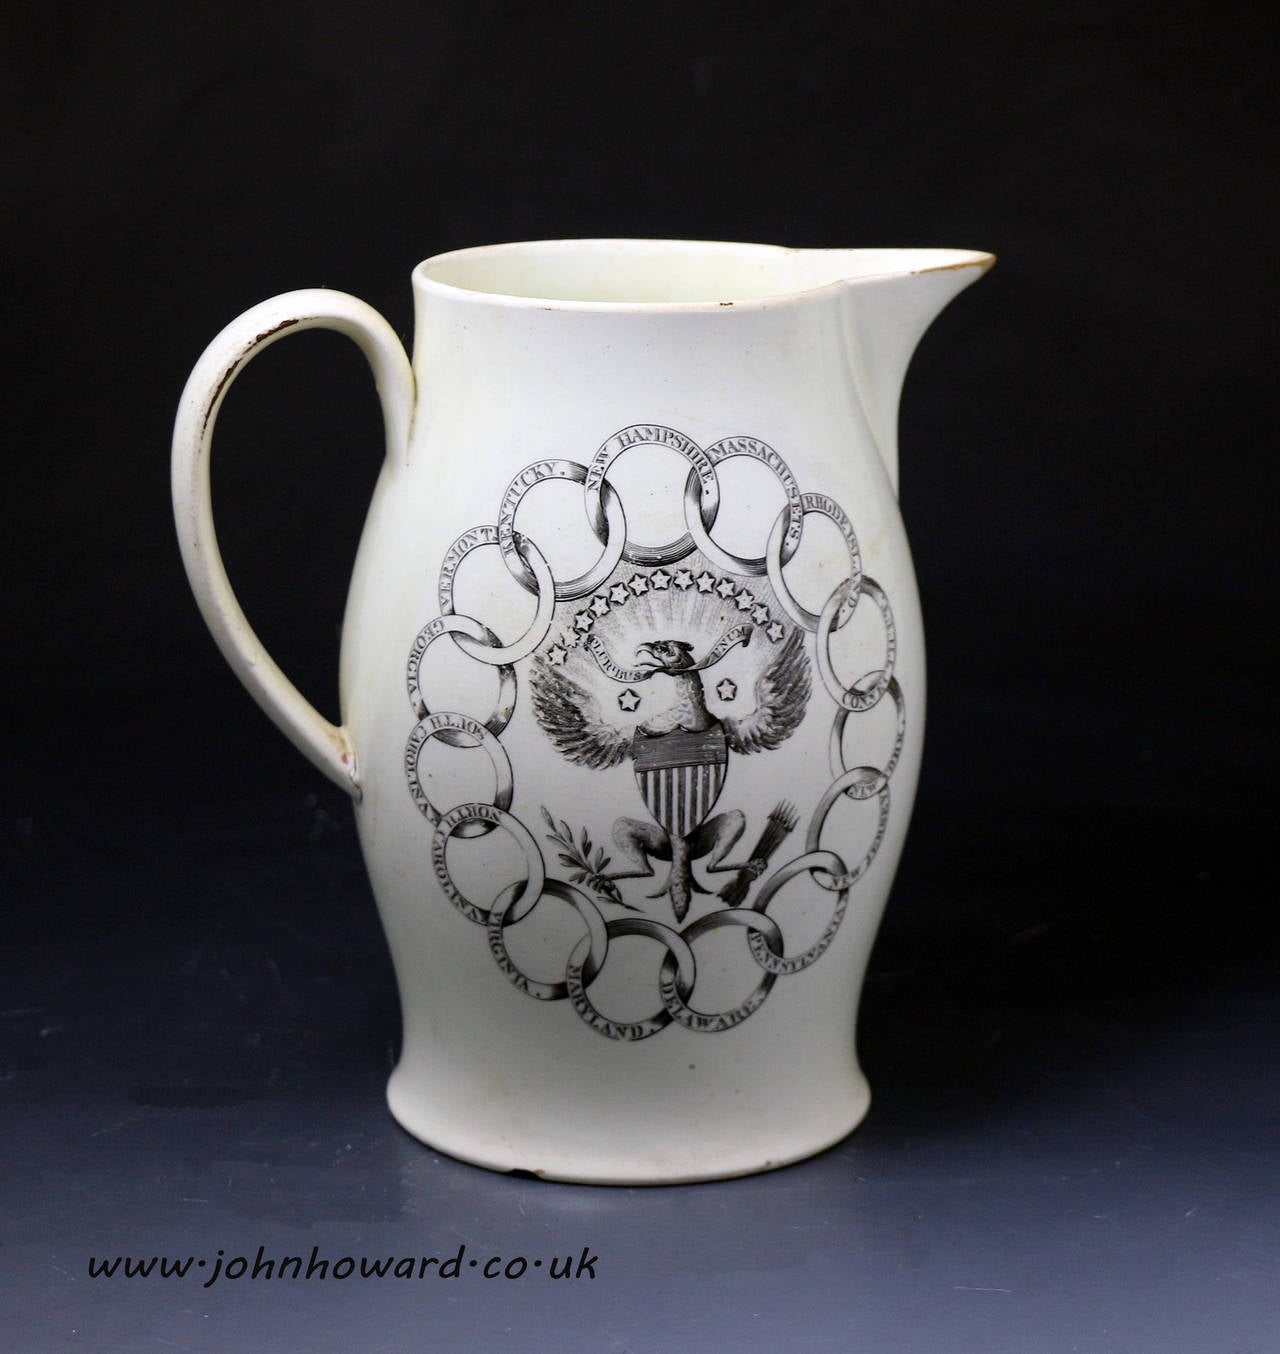 Antique English pottery creamware pitcher with emblems for 15 American states, the reverse a print with overpainted enamel colours of a sailing ship with the American flag c1800 
The pitcher is probably Liverpool Pottery.